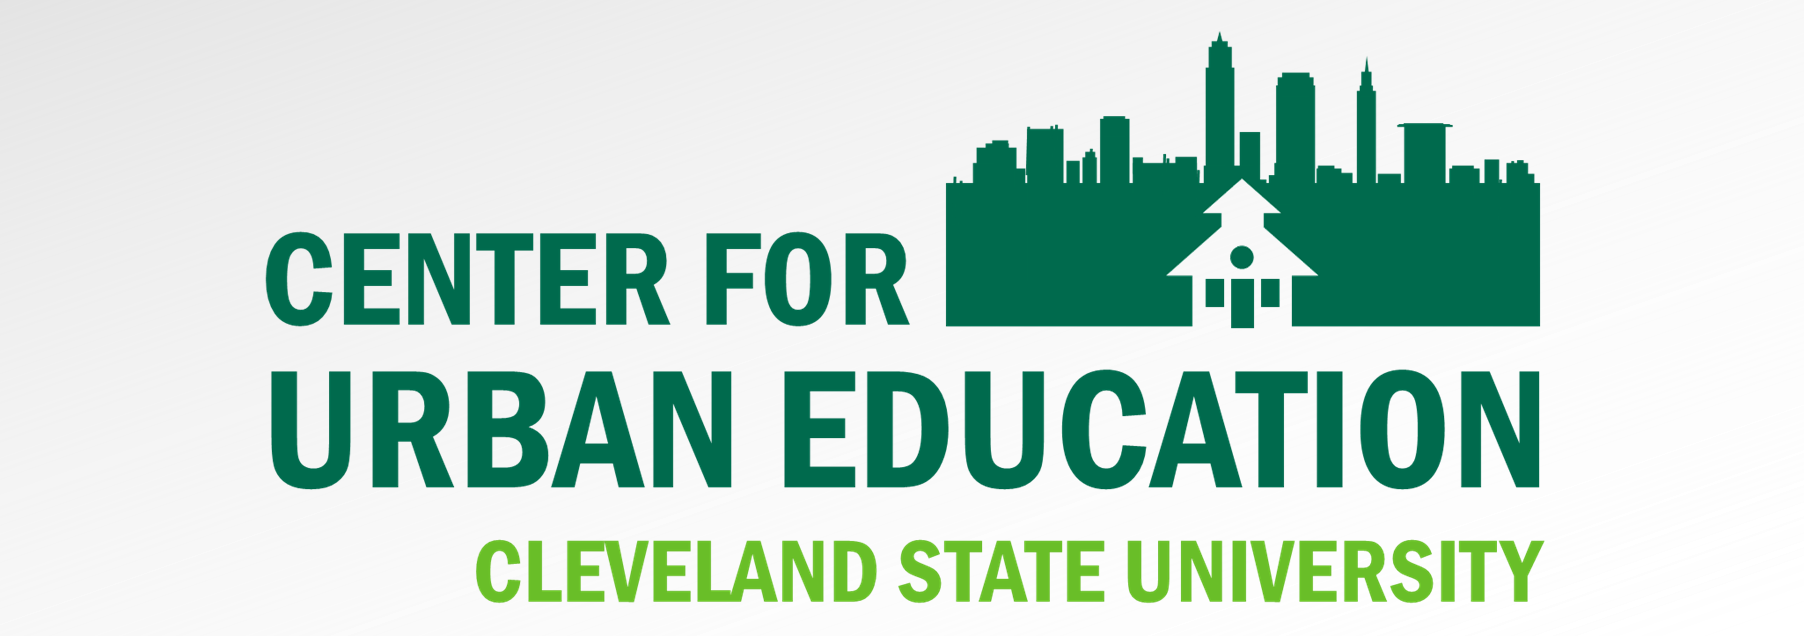 The Mission Of The Center For Urban Education At Cleveland - Cleveland State University (1804x636)